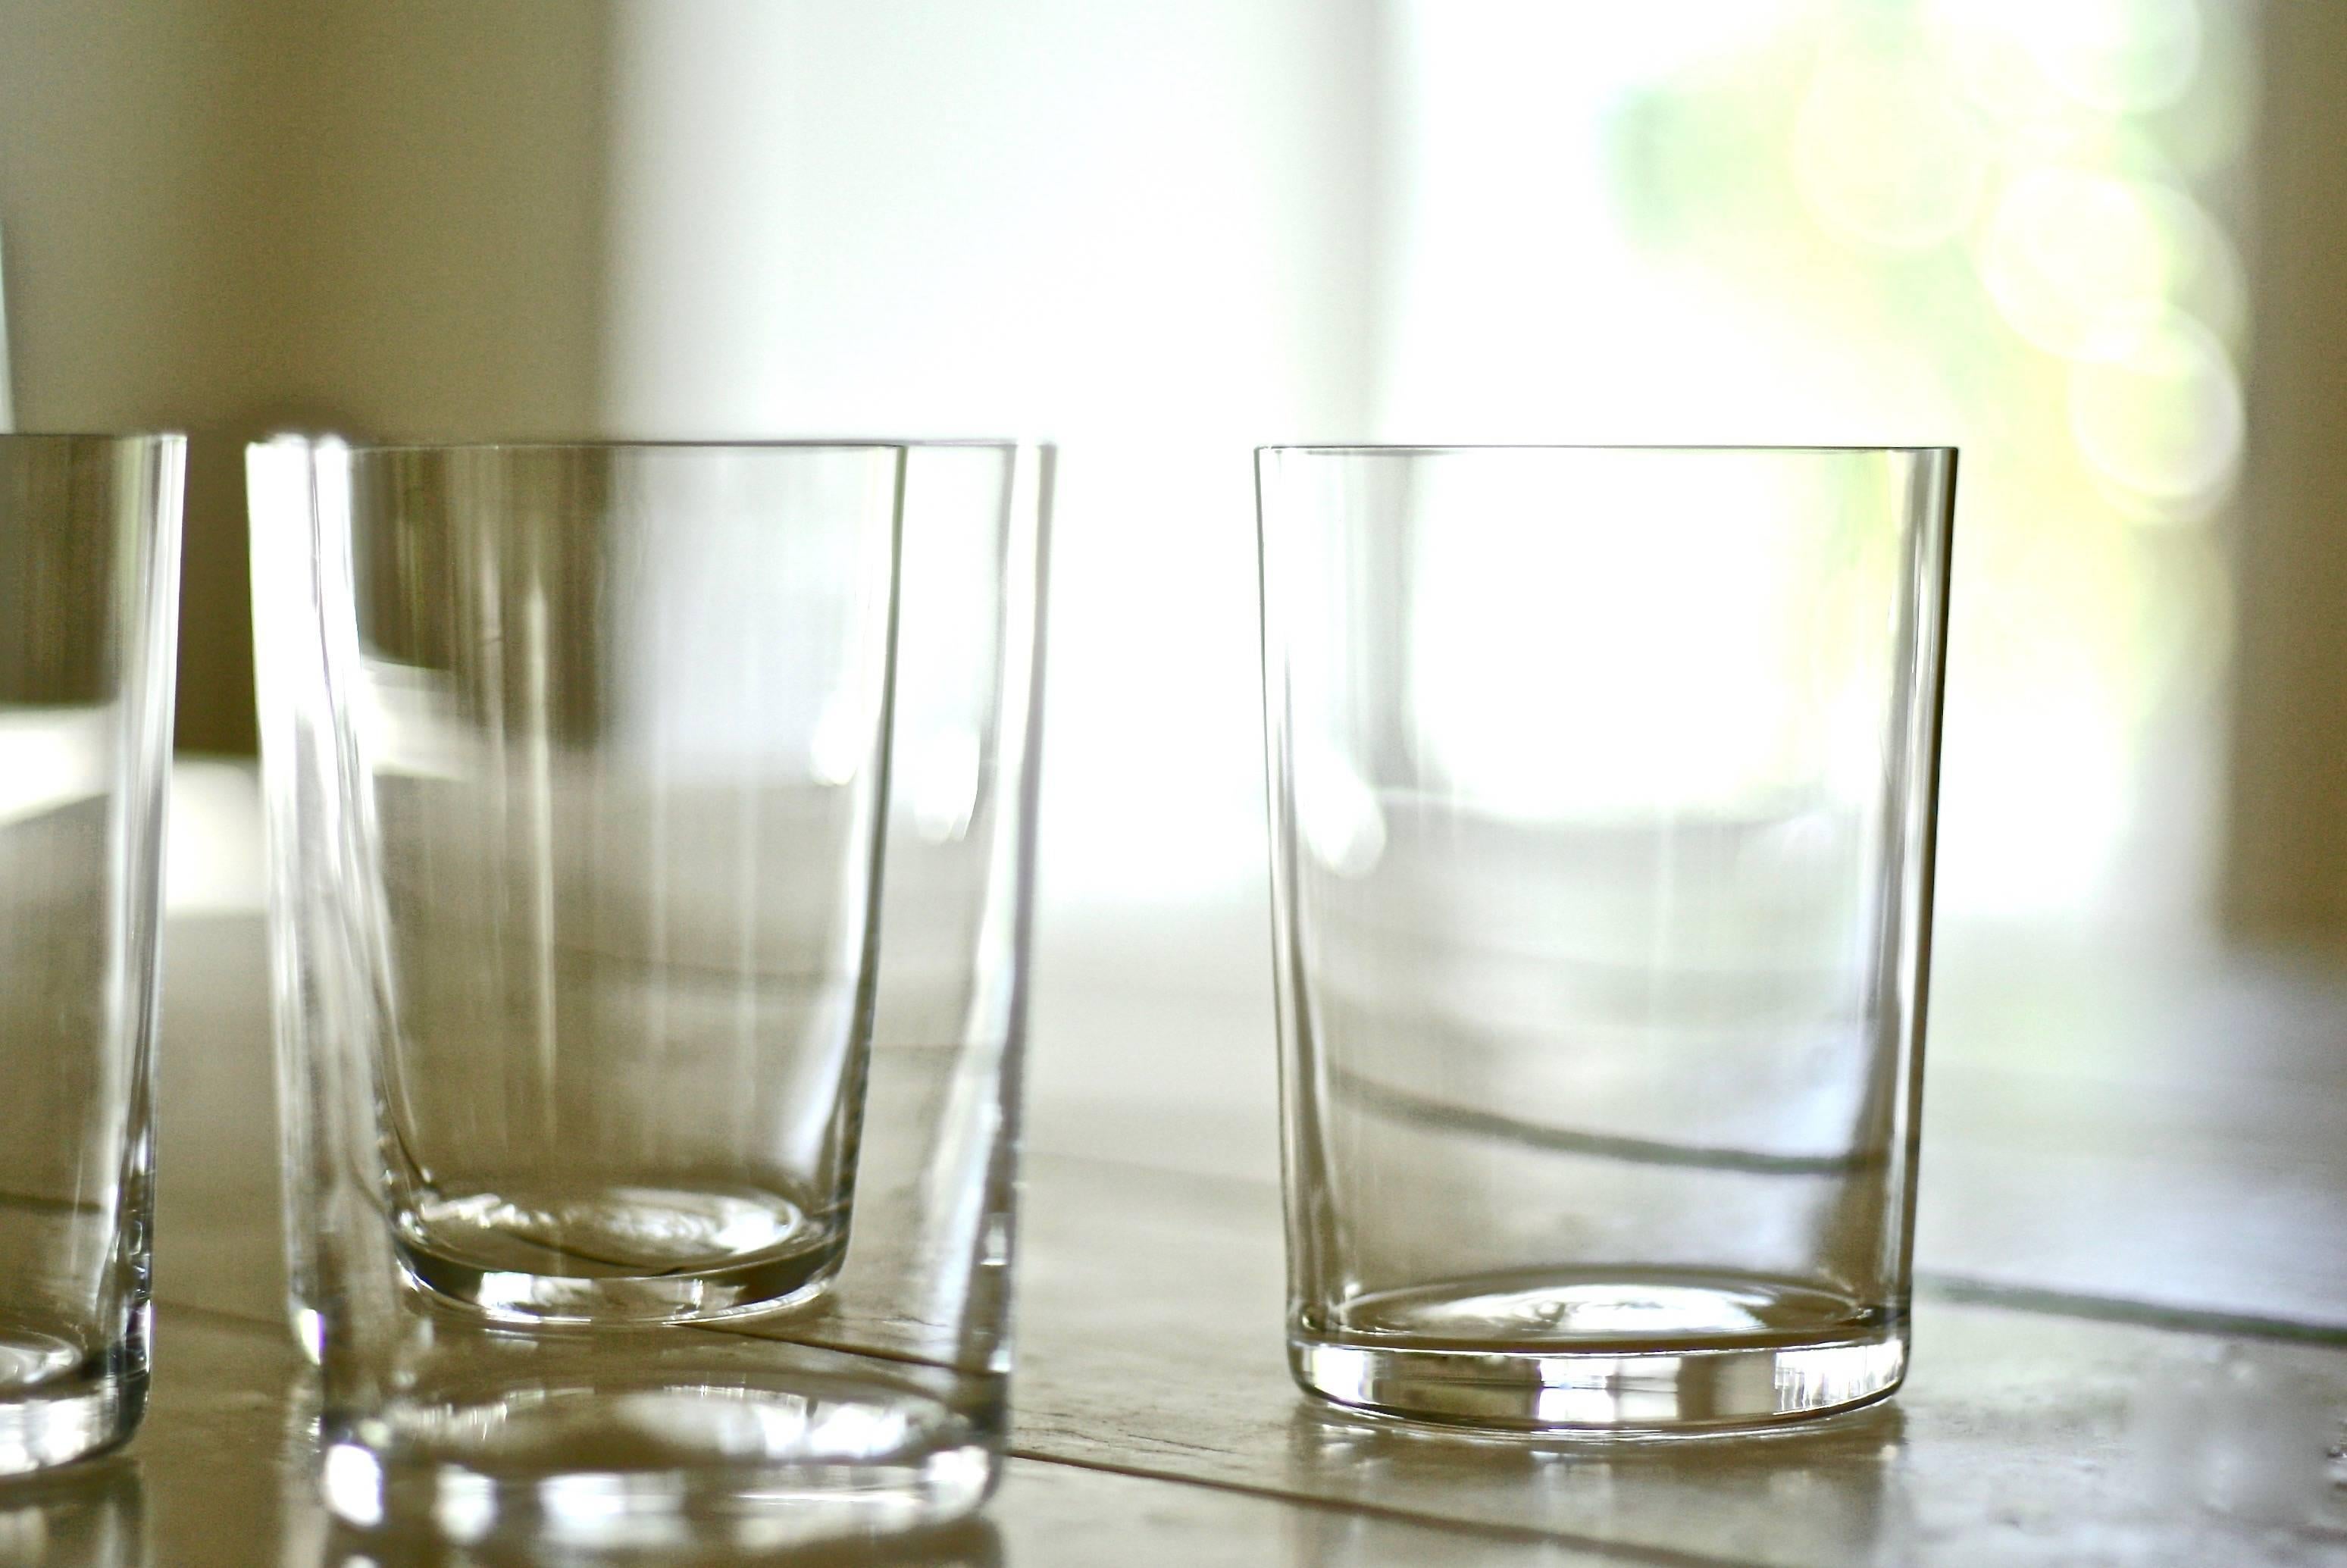 Launched with Takashimaya in 1999, these handblown crystal water glasses have become a modern Classic. Each Deborah Ehrlich piece is designed for the extraordinary strength and clarity of Swedish crystal. The simplicity of the design, the thinness